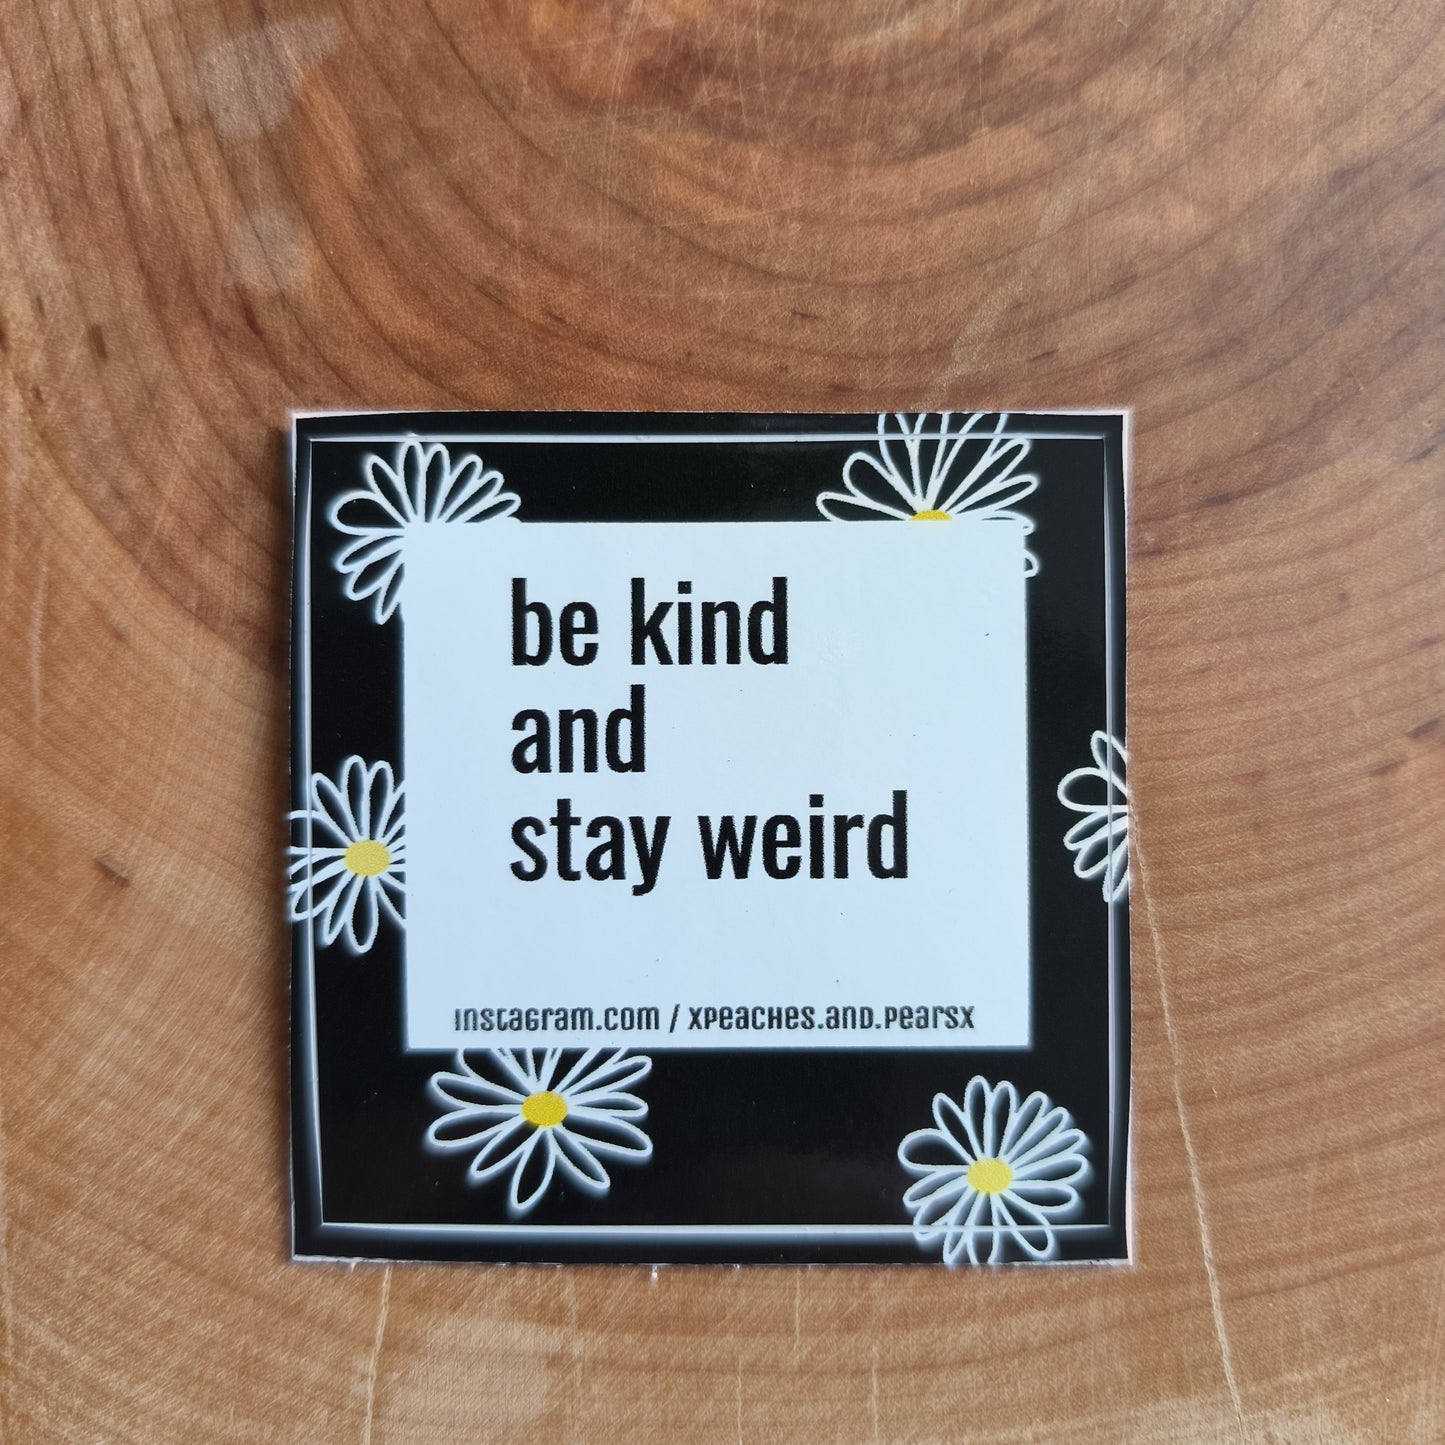 Sticker "be kind and stay weird"